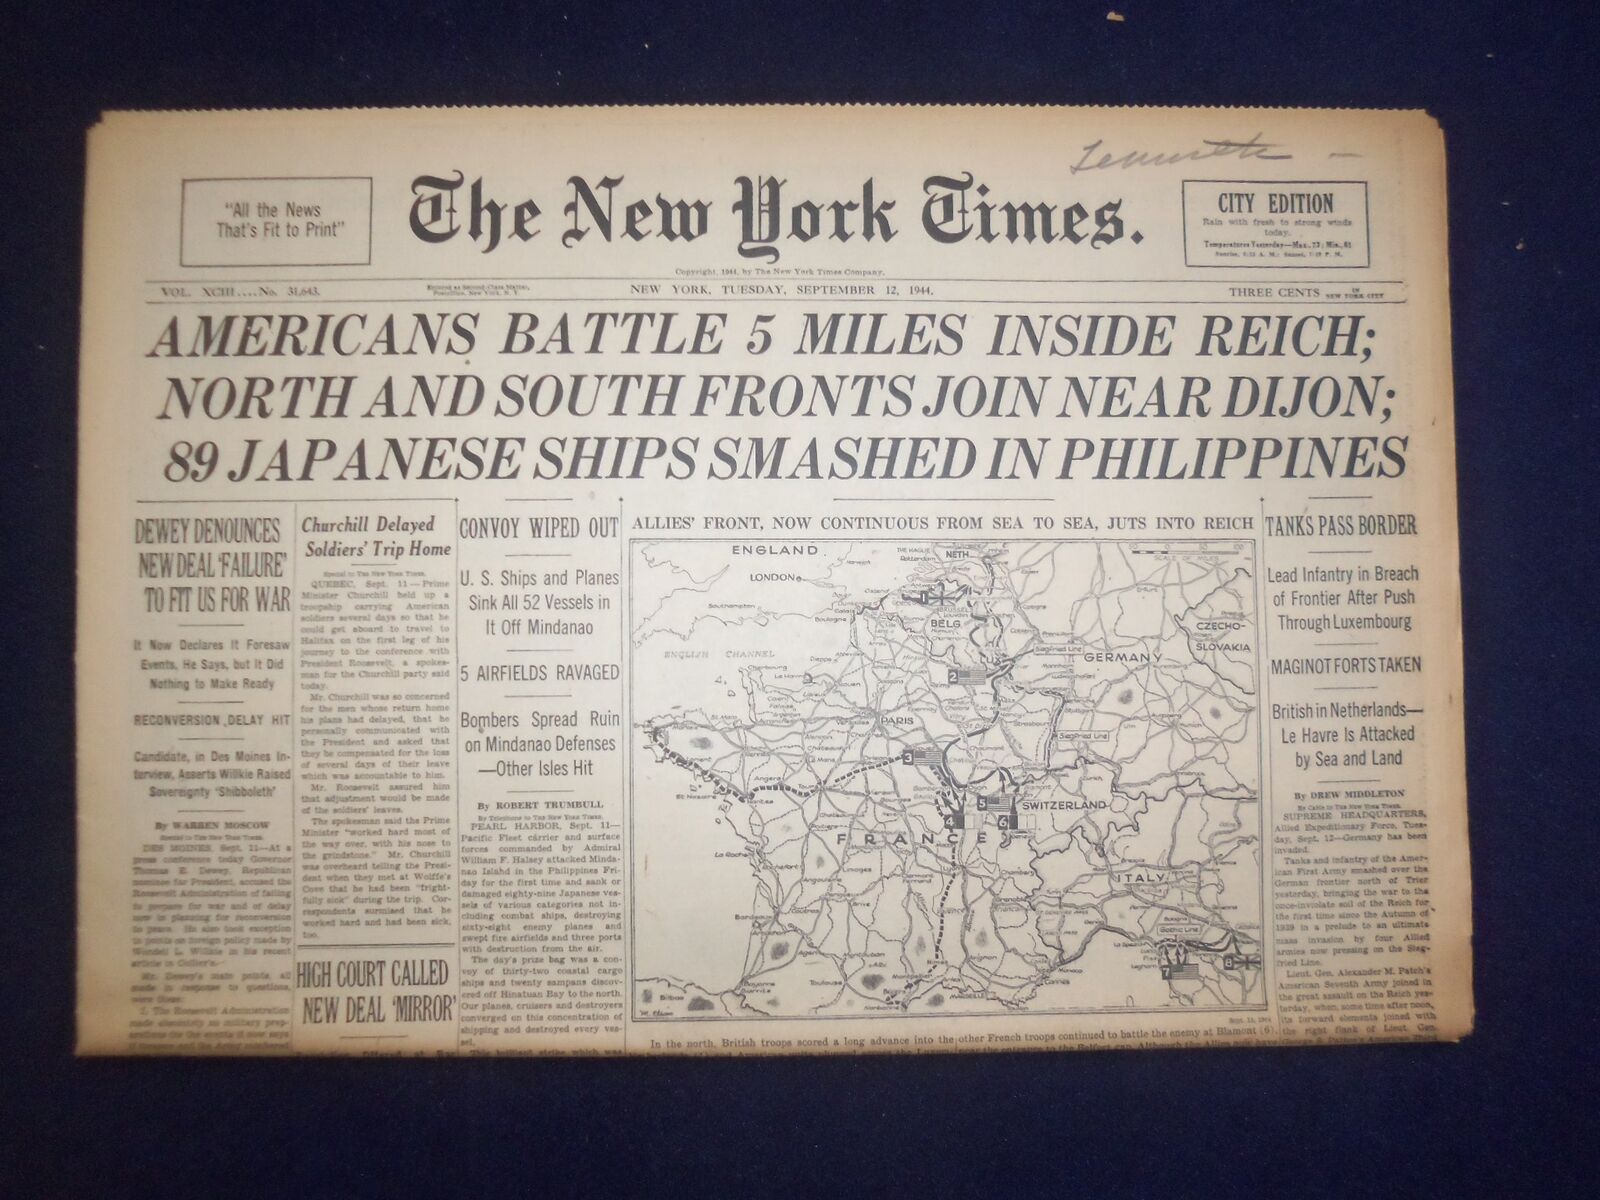 1944 SEP 12 NEW YORK TIMES - AMERICANS BATTLE 5 MILES INSIDE REICH - NP 6620